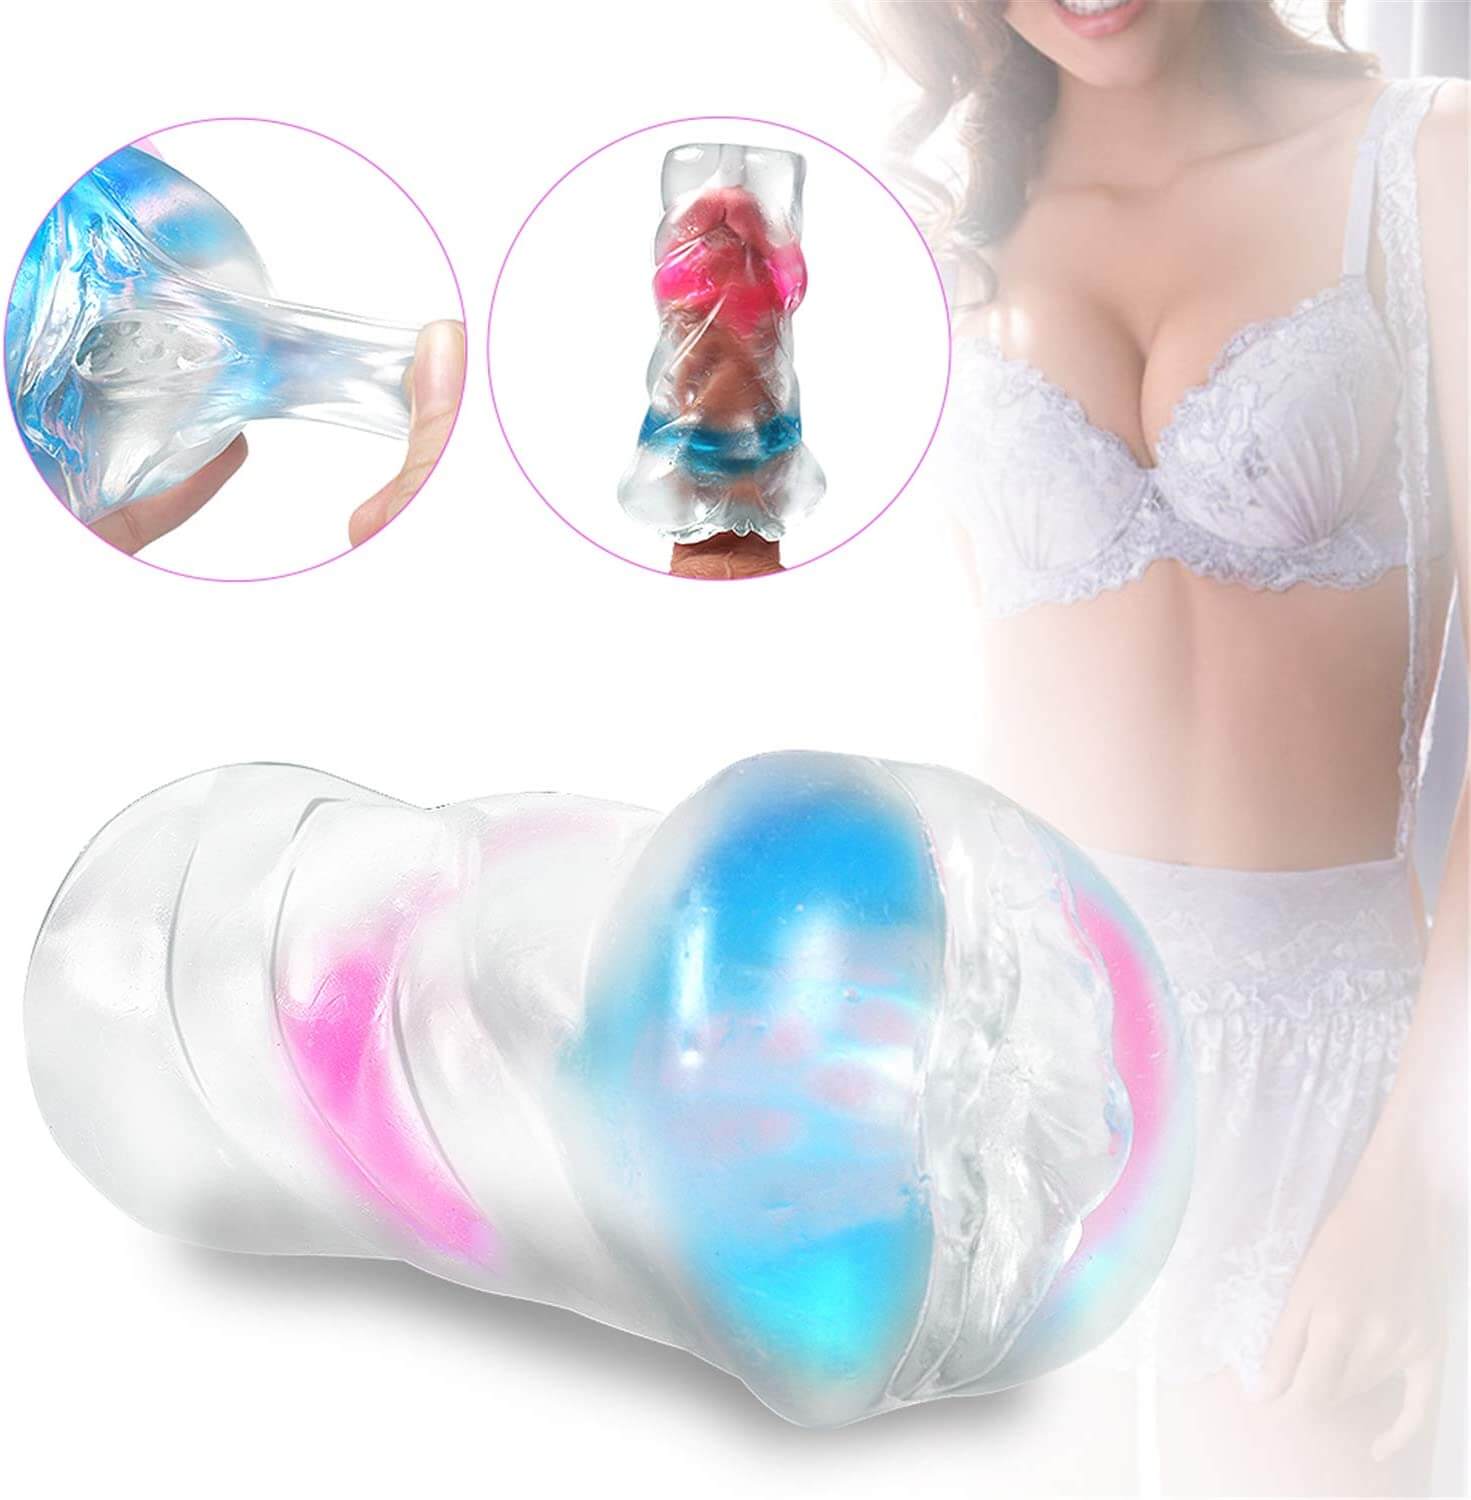 Portable Transparent Jelly Crystal Pocket Pussy With Cock Rings Weadultshop image picture